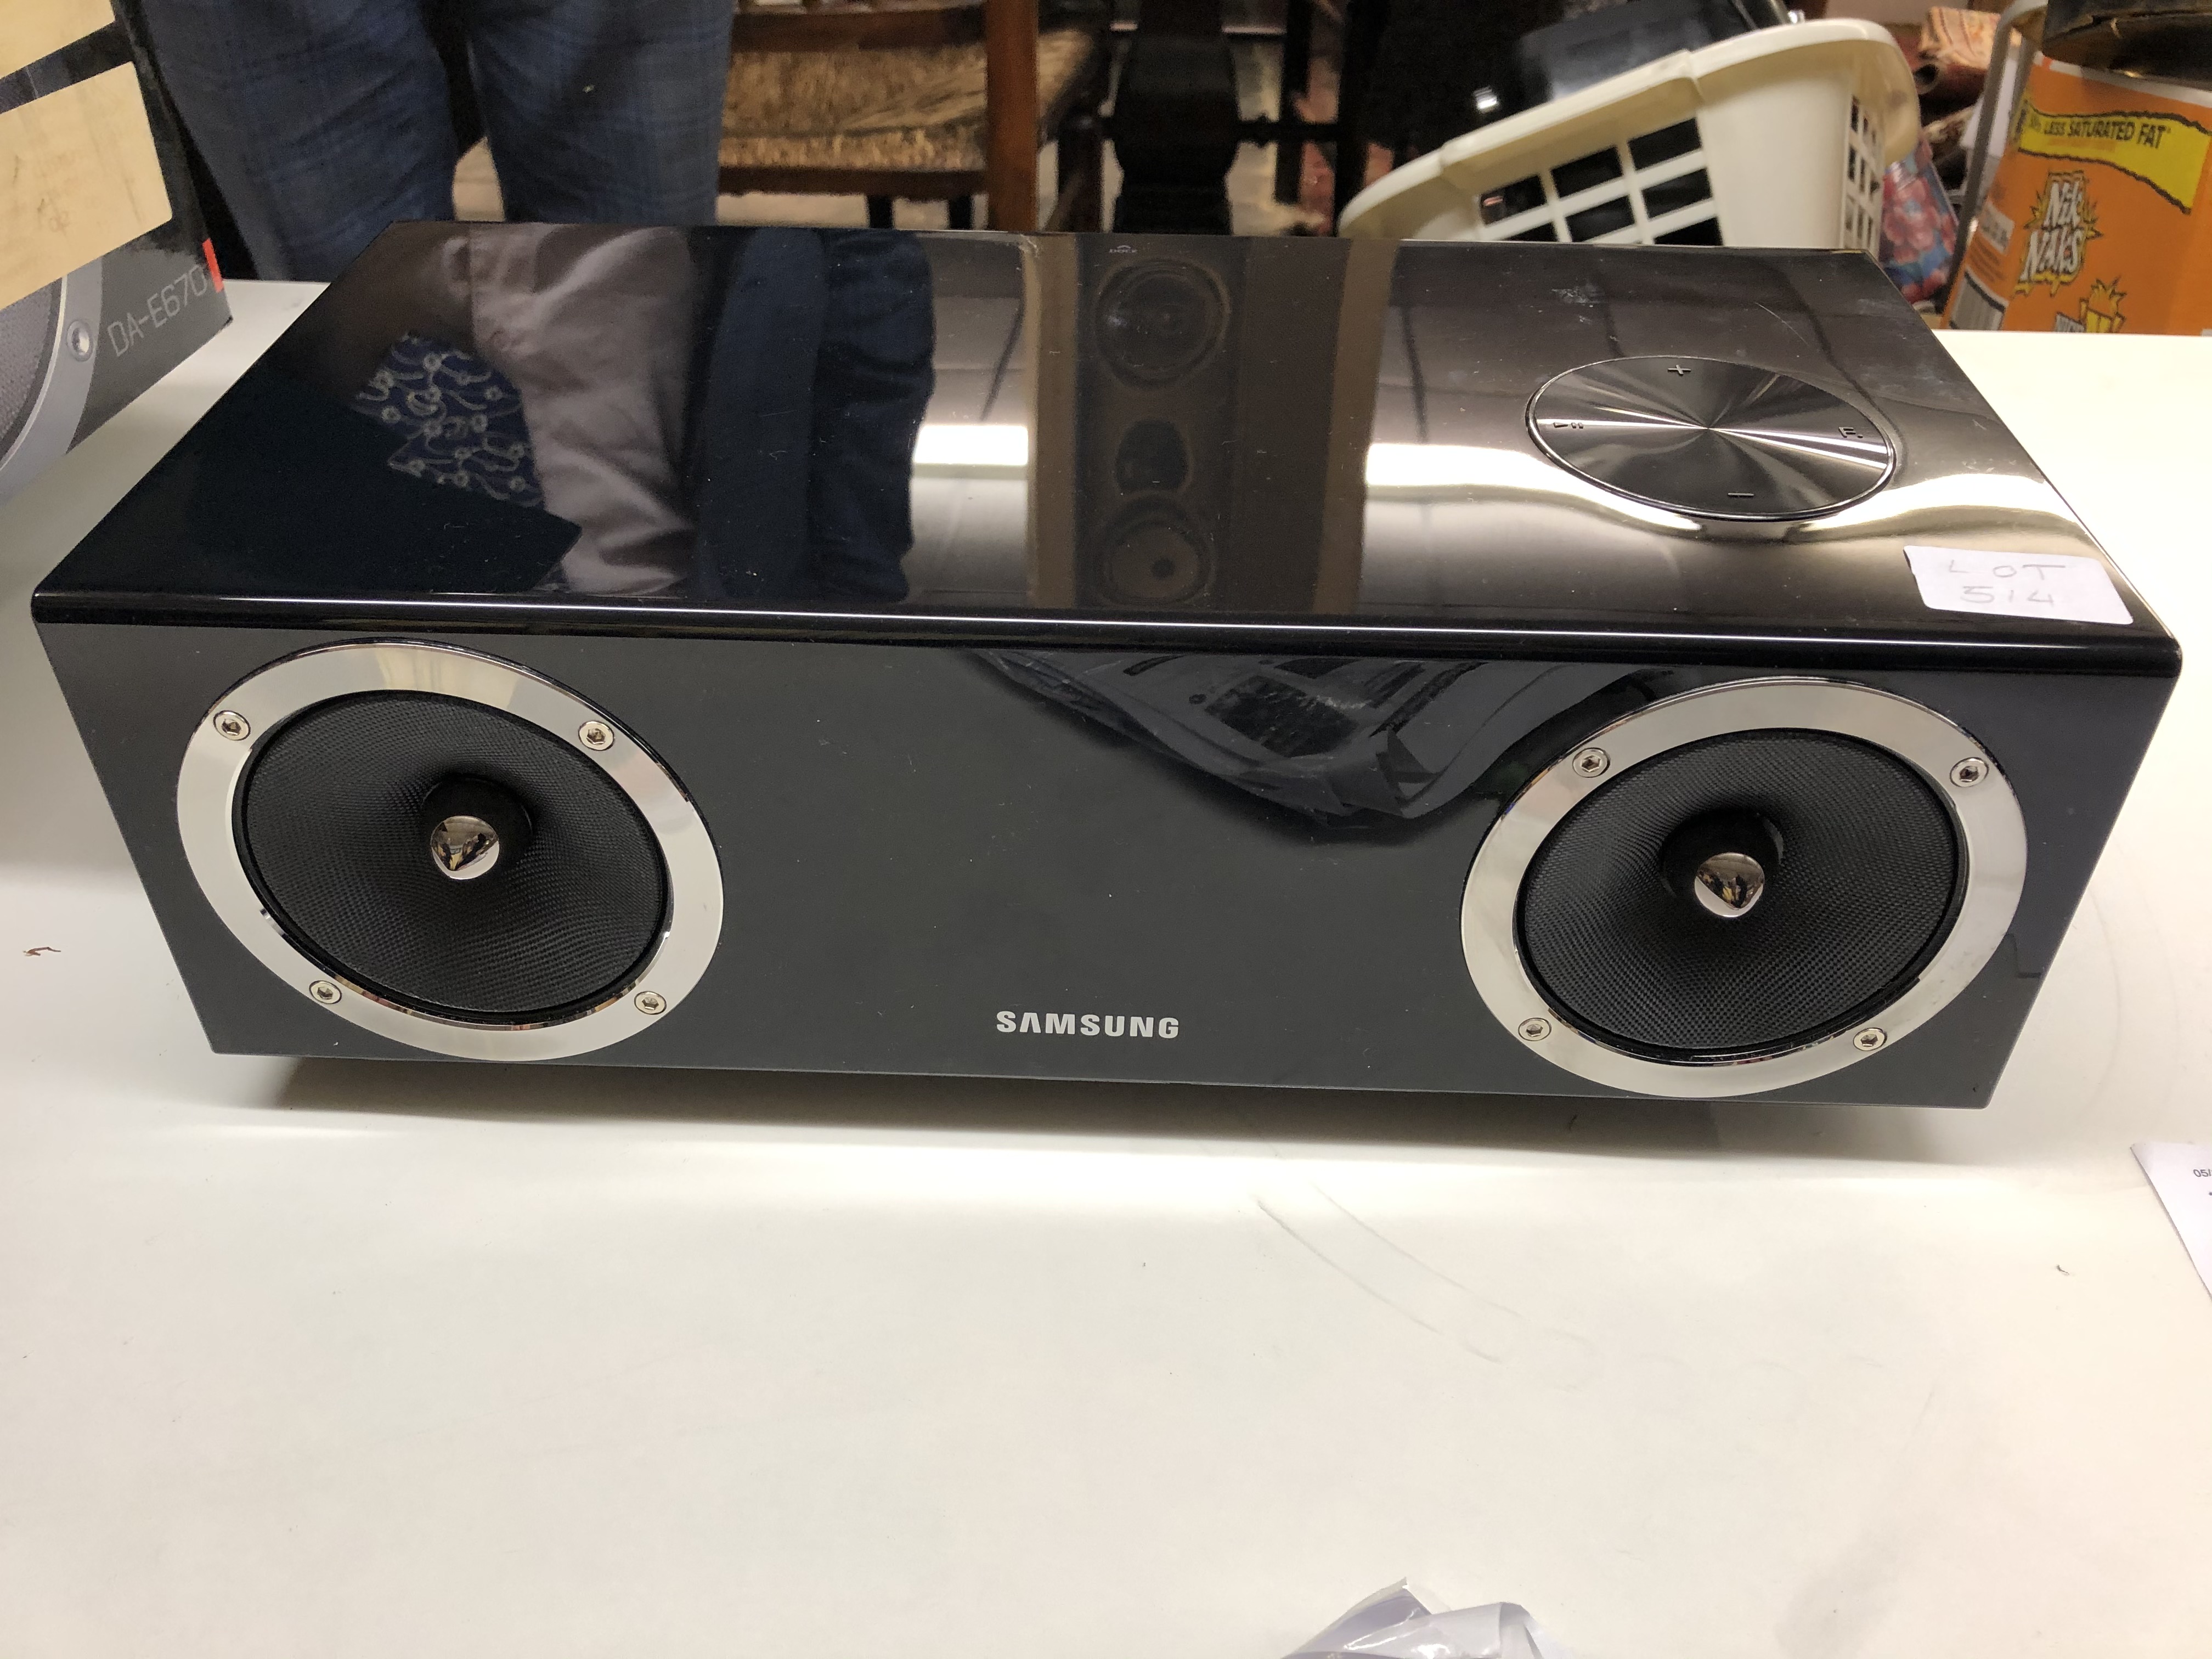 BOXED SAMSUNG WIRELESS AUDIO WITH DOCK AND REMOTE CONTROL